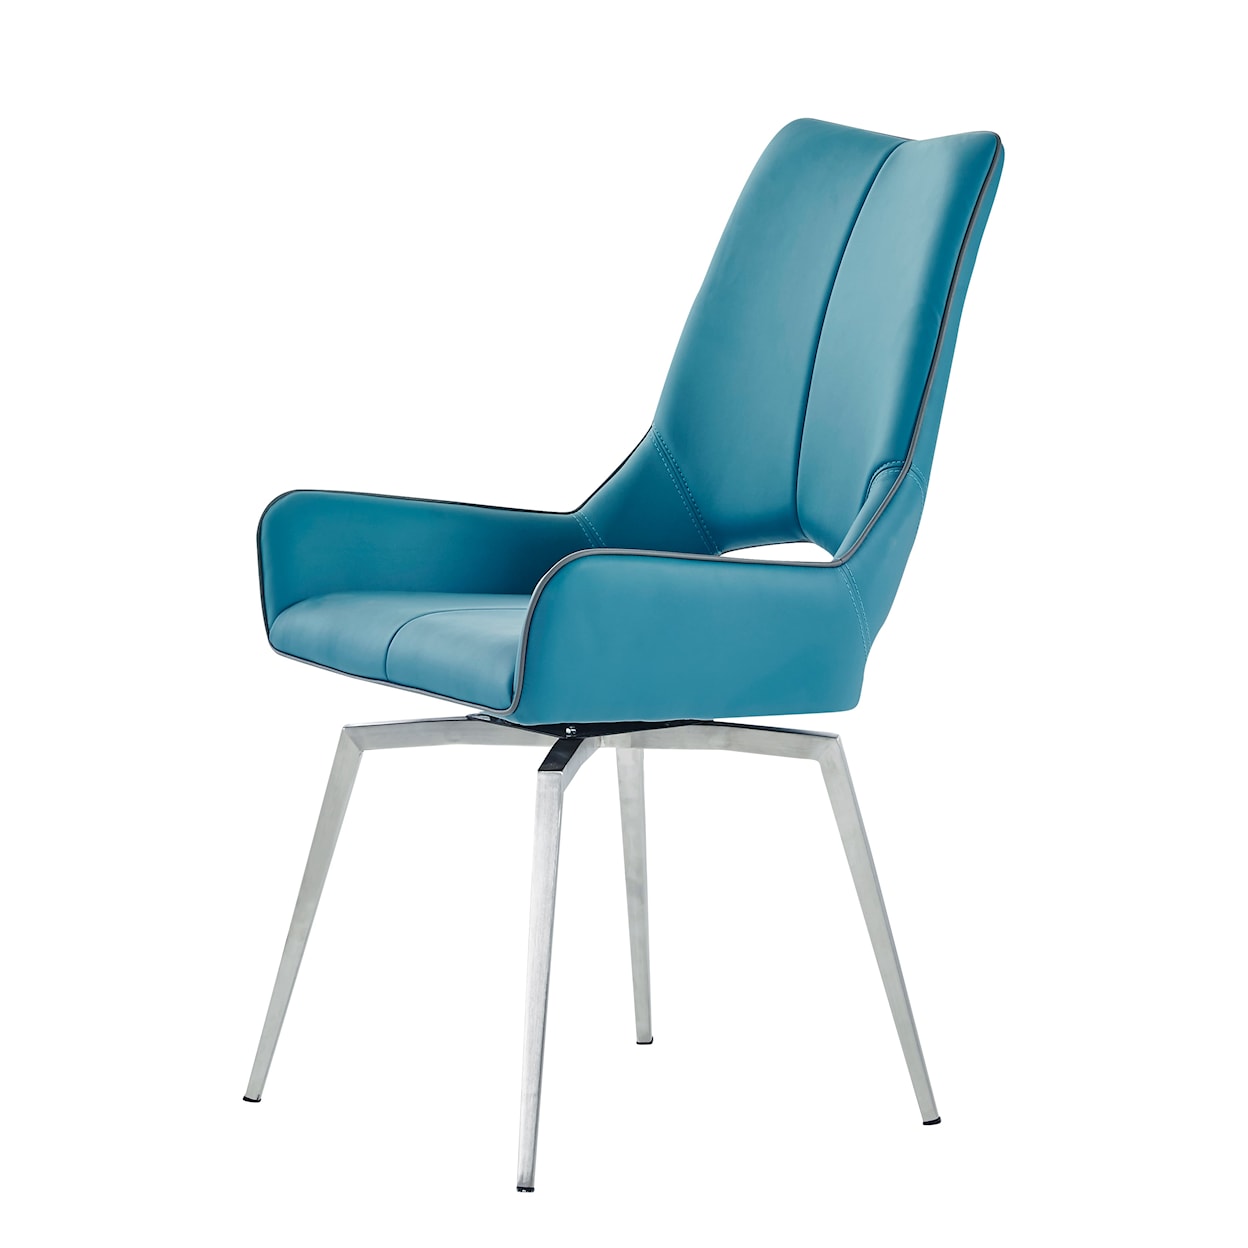 Global Furniture 4878 Swivel Turquoise Dining Chair Set of 2